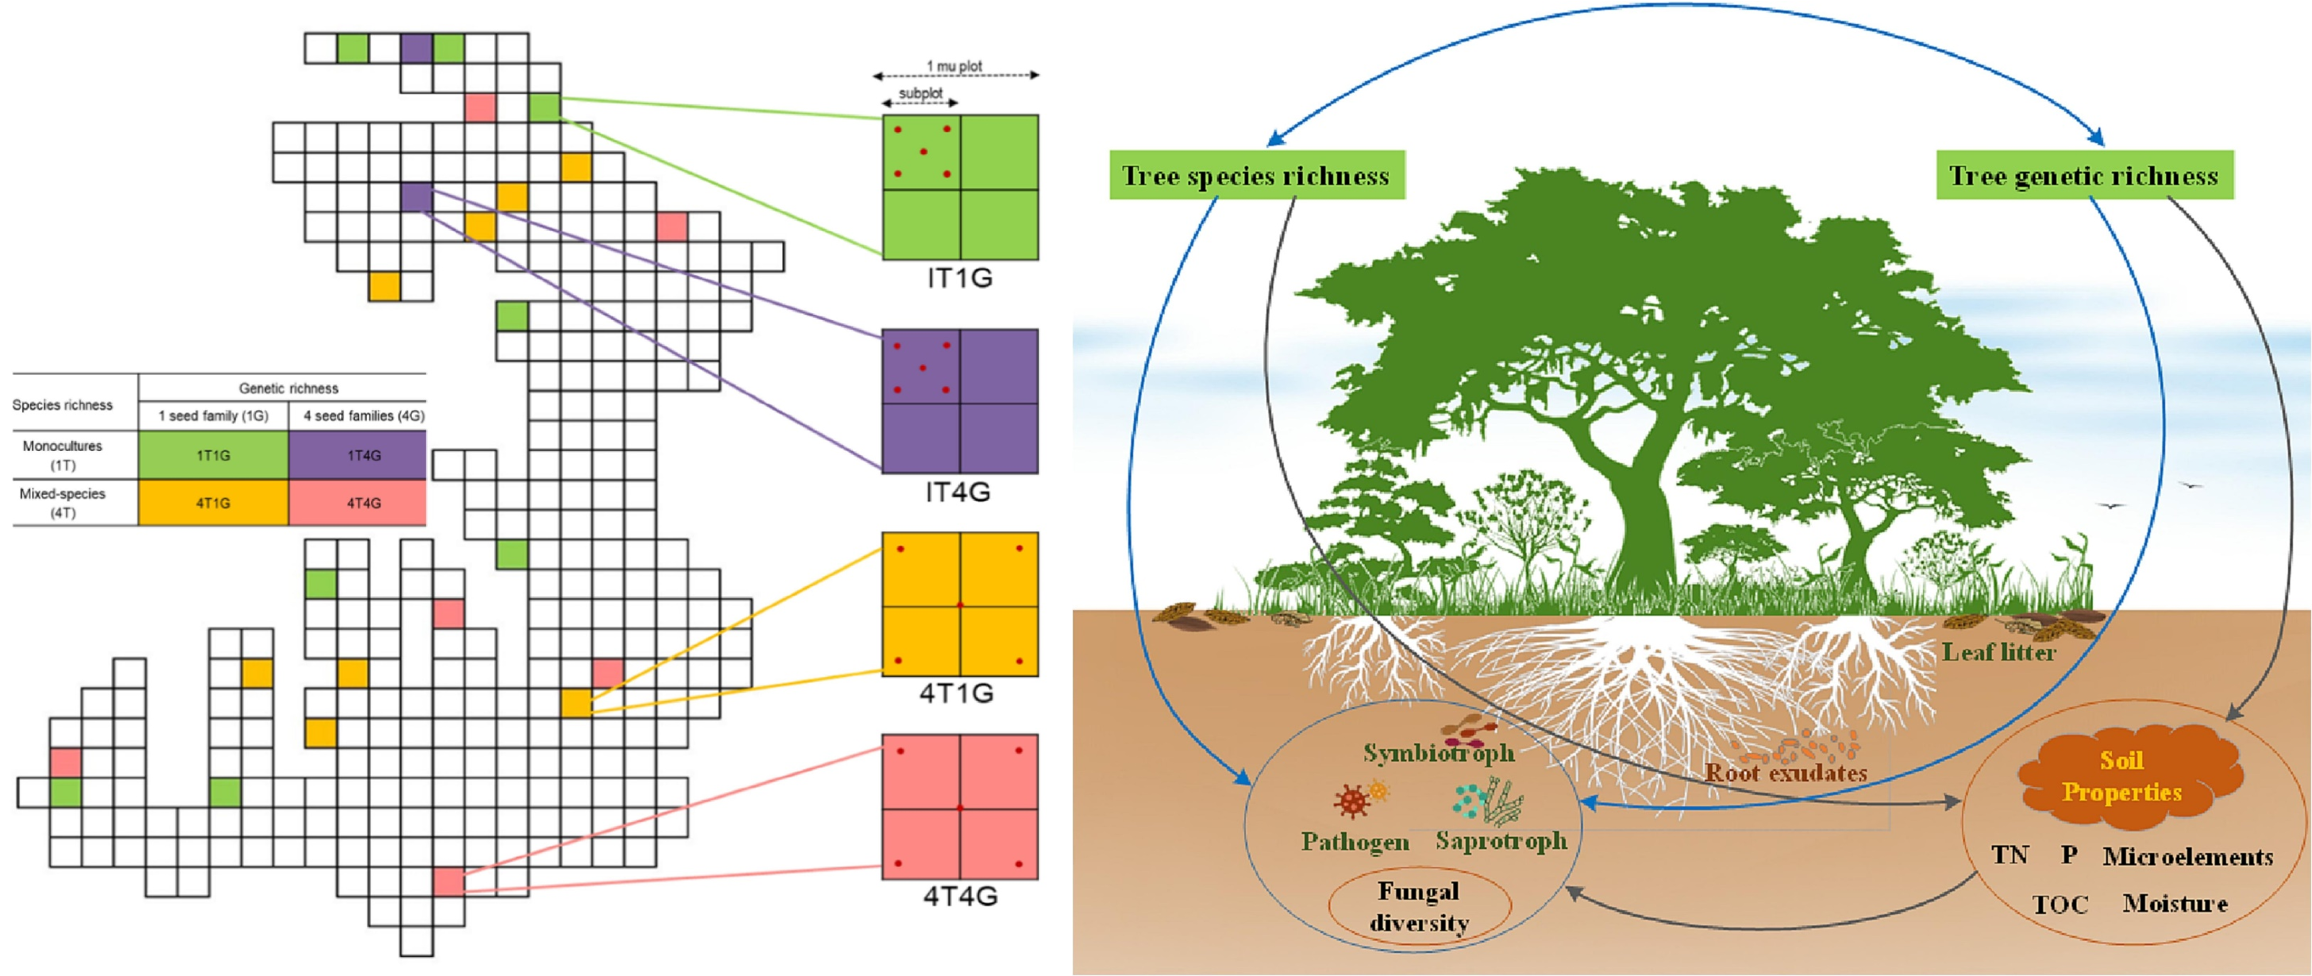 Subtropical forest tree genetic richness causes contrasting effects on soil fungal guilds in monocultures and mixed-species stands